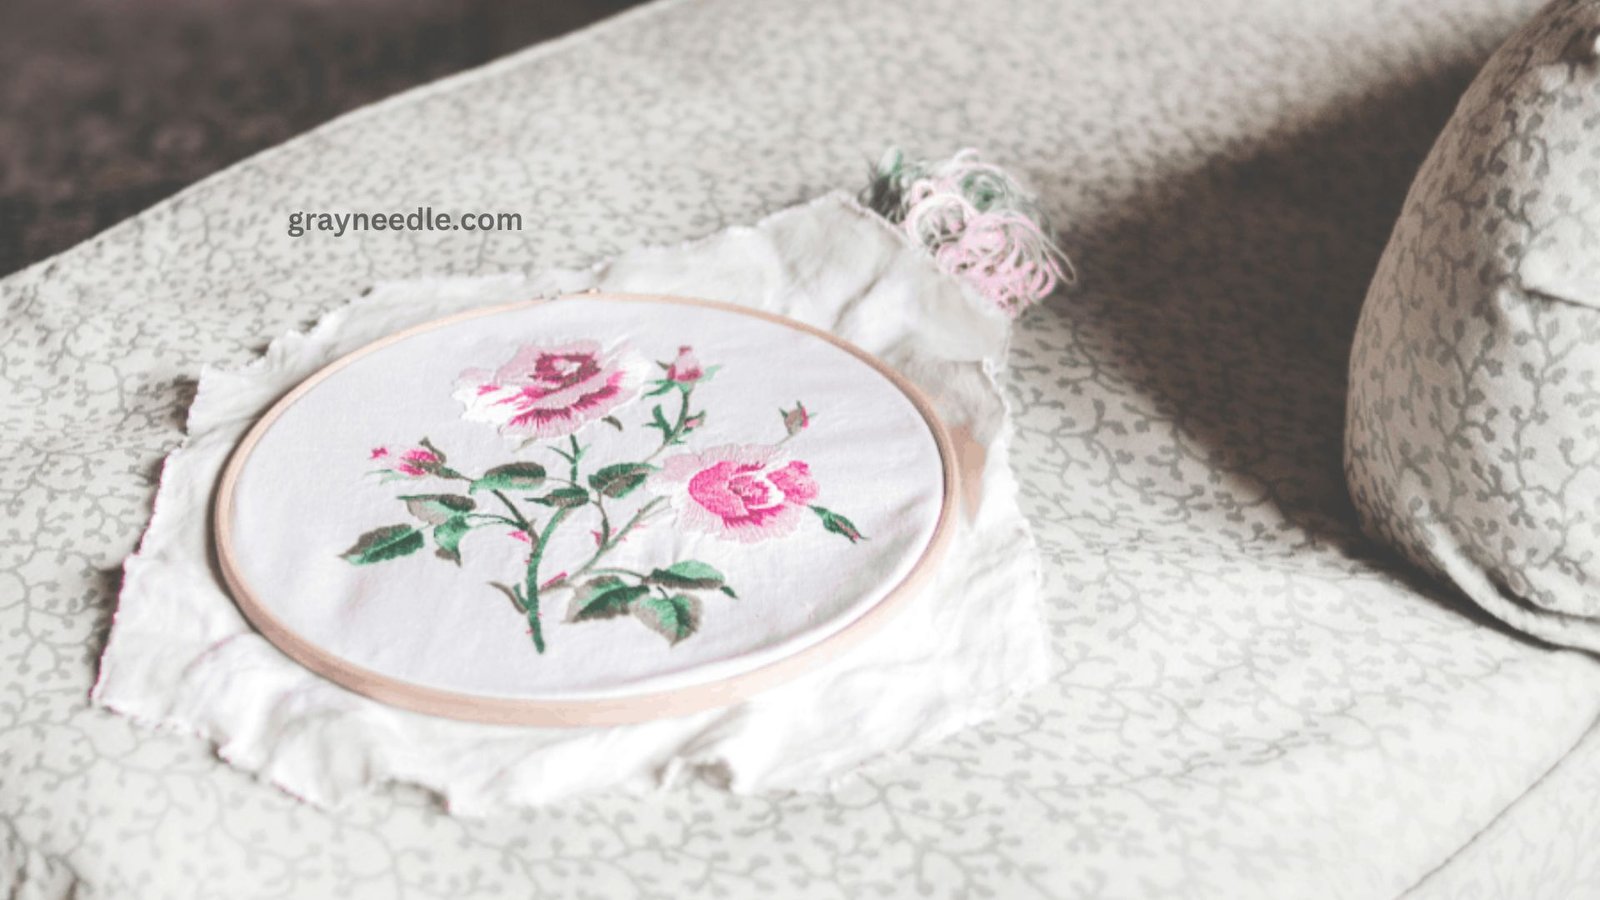 Can I Use Sewing Thread for Embroidery?